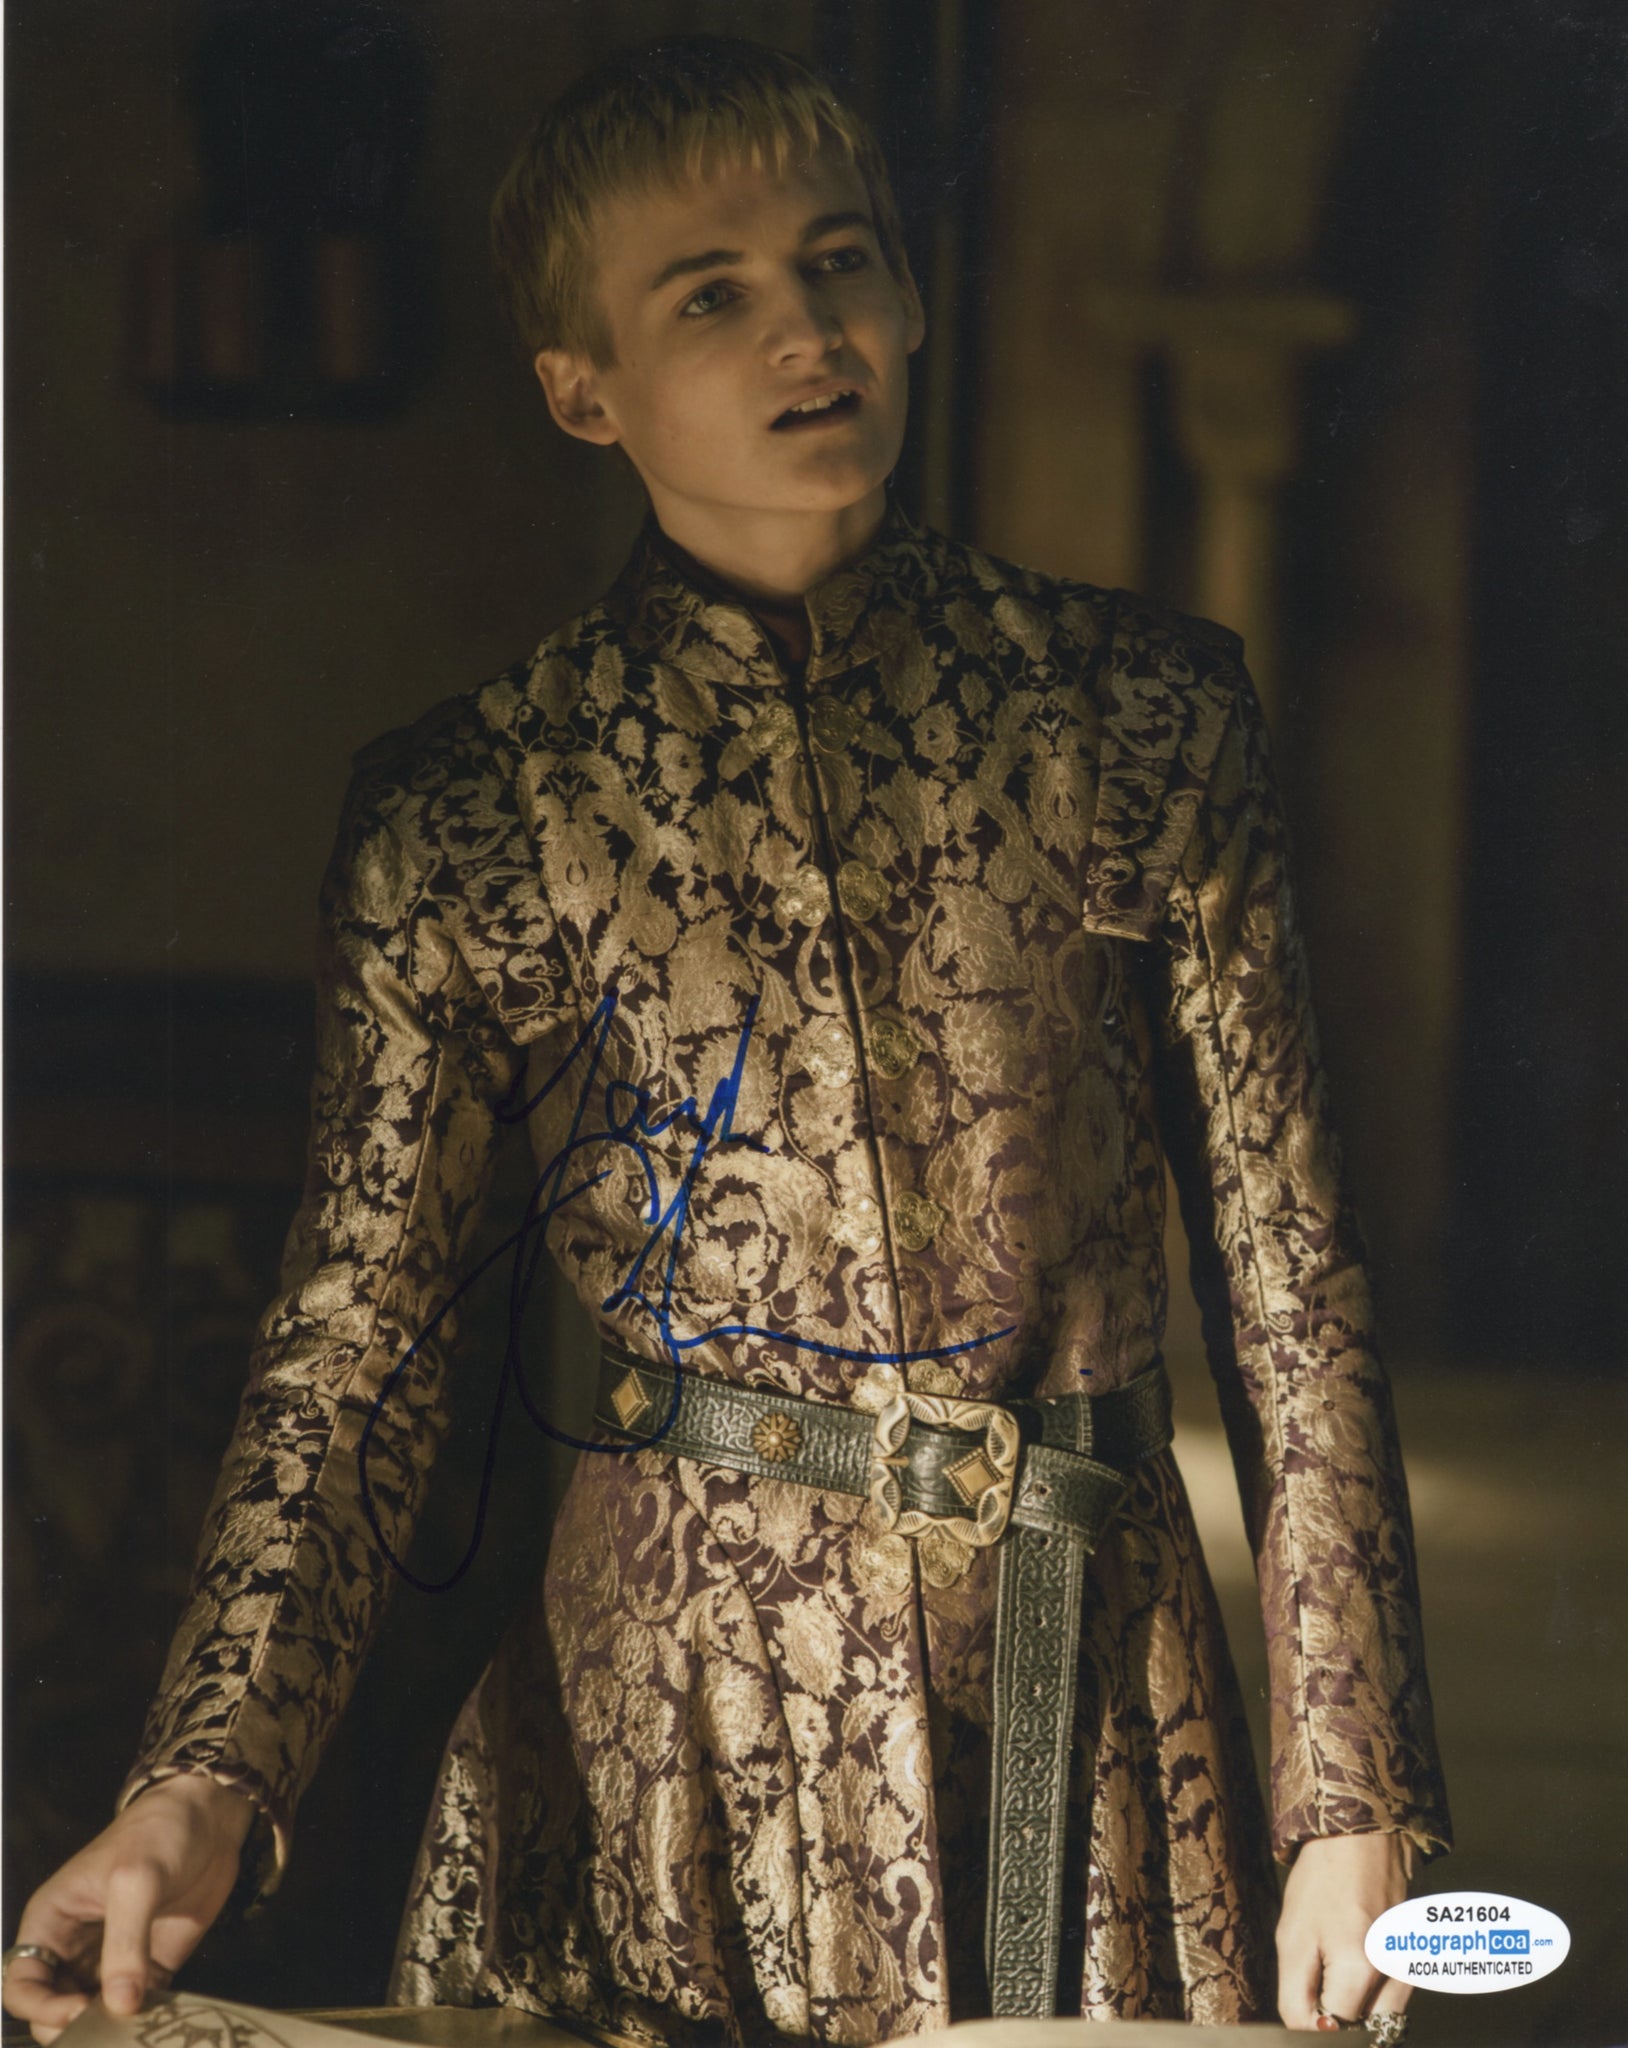 Jack Gleeson Game of Thrones Signed Autograph 8x10 Photo ACOA #2 - Outlaw Hobbies Authentic Autographs